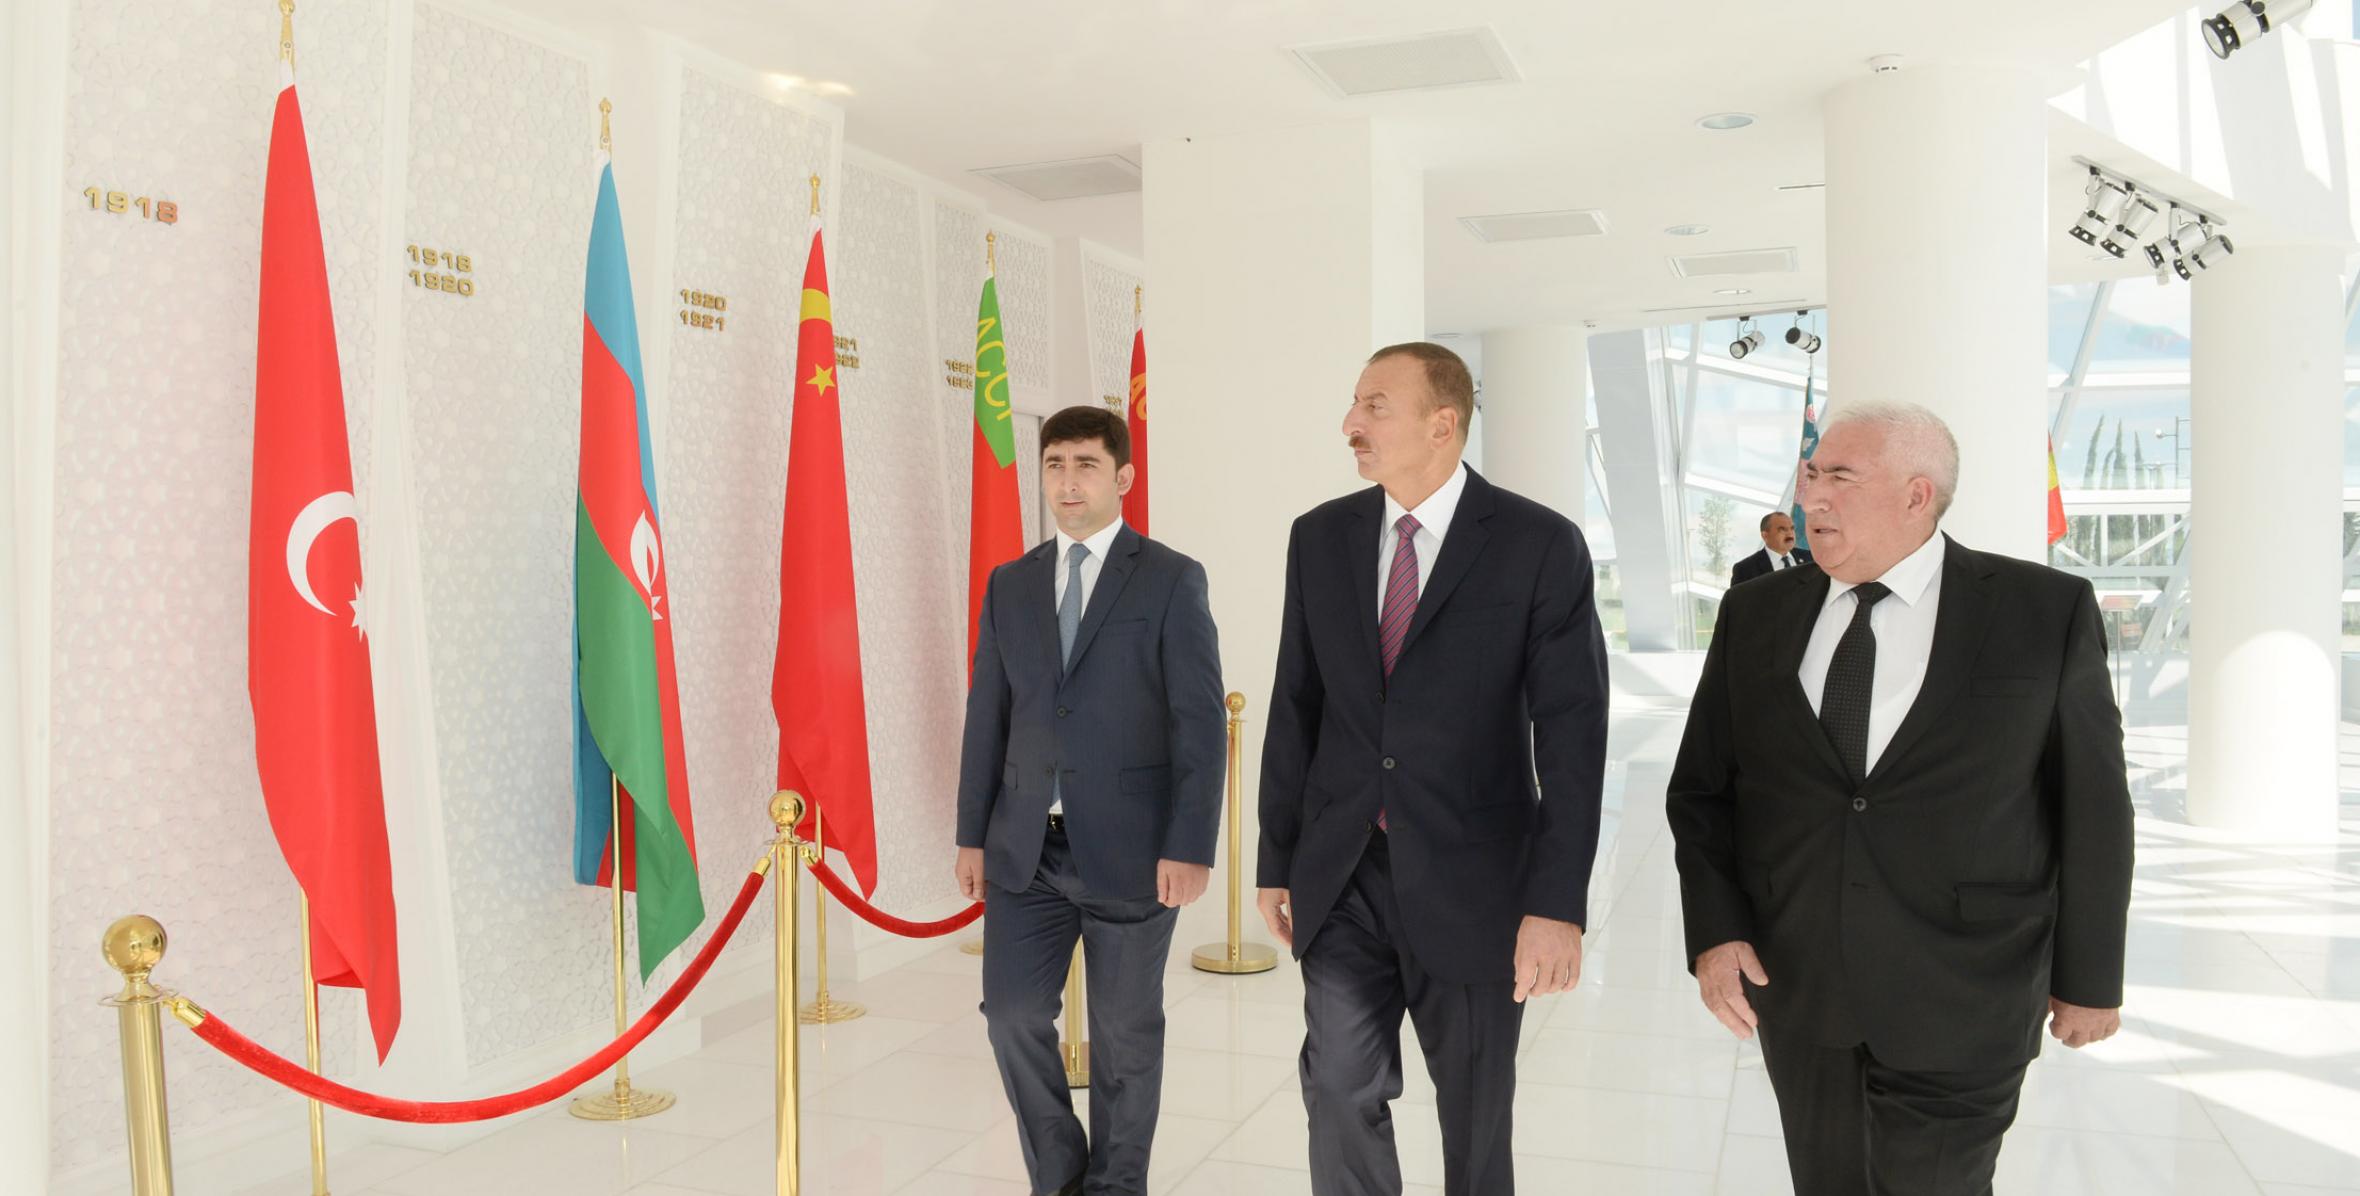 Ilham Aliyev reviewed the Flag Square and the Flag Museum in Shamkir